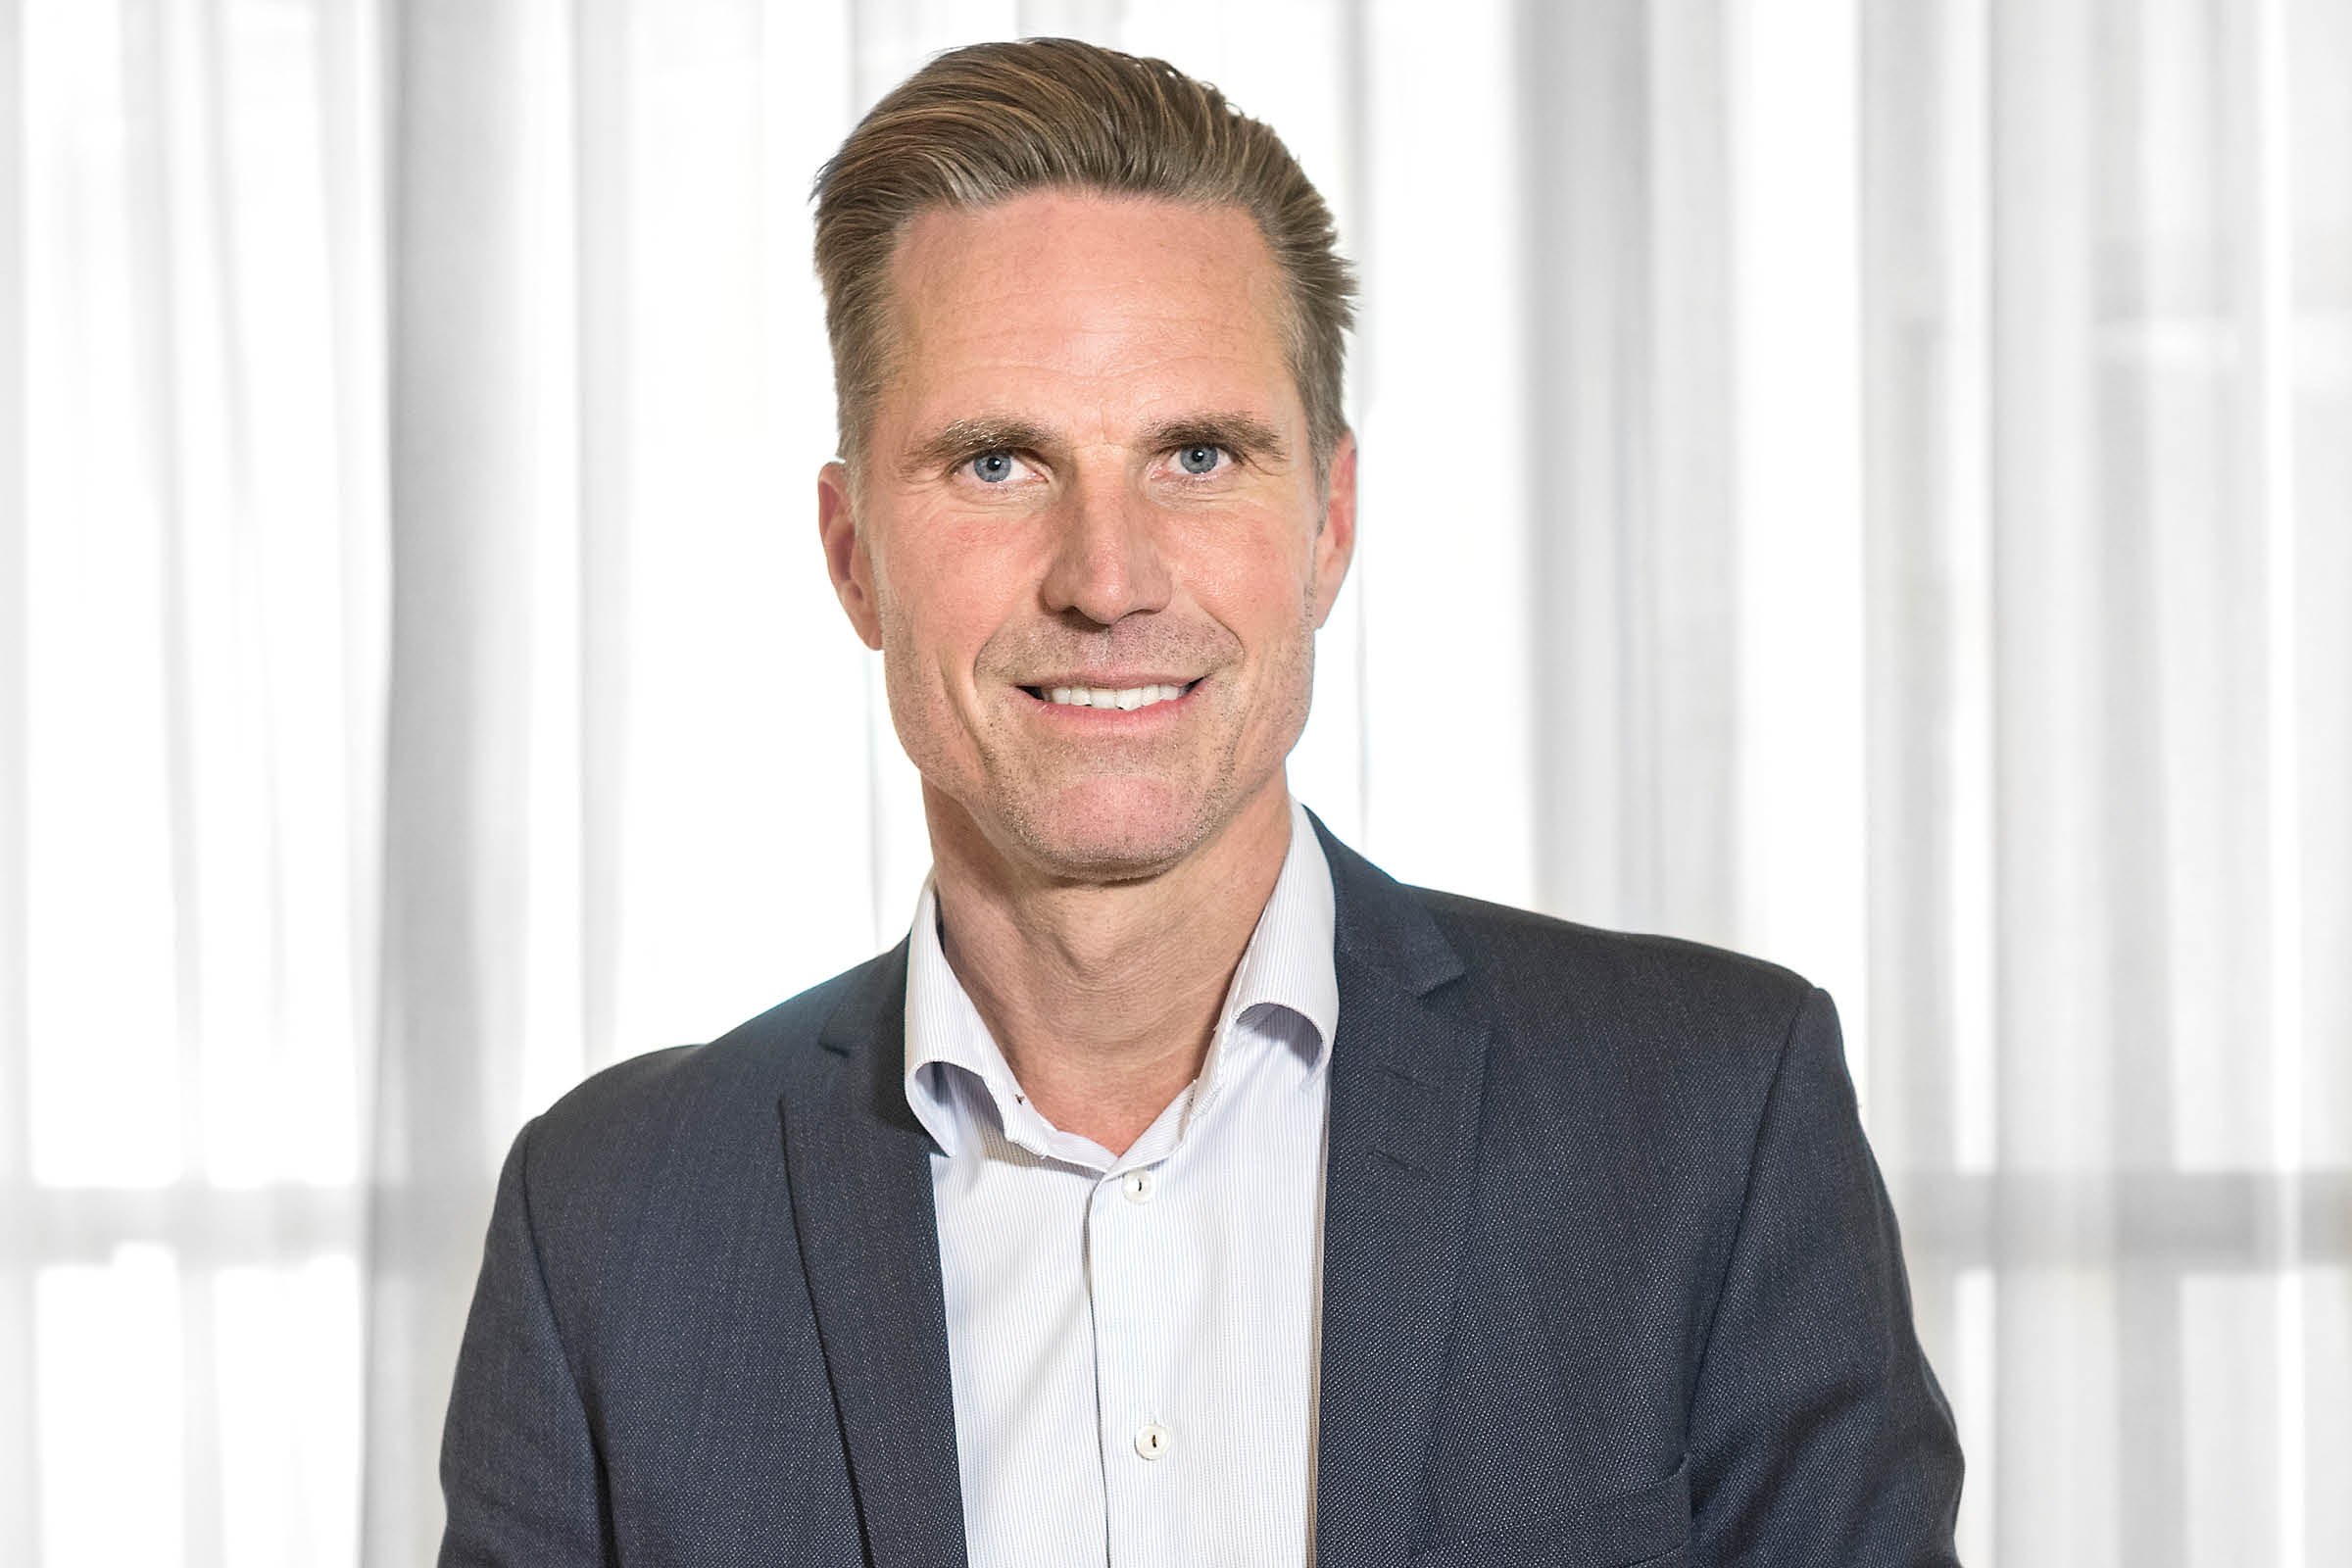 Tomas Blomquist, President and CEO of Biotage